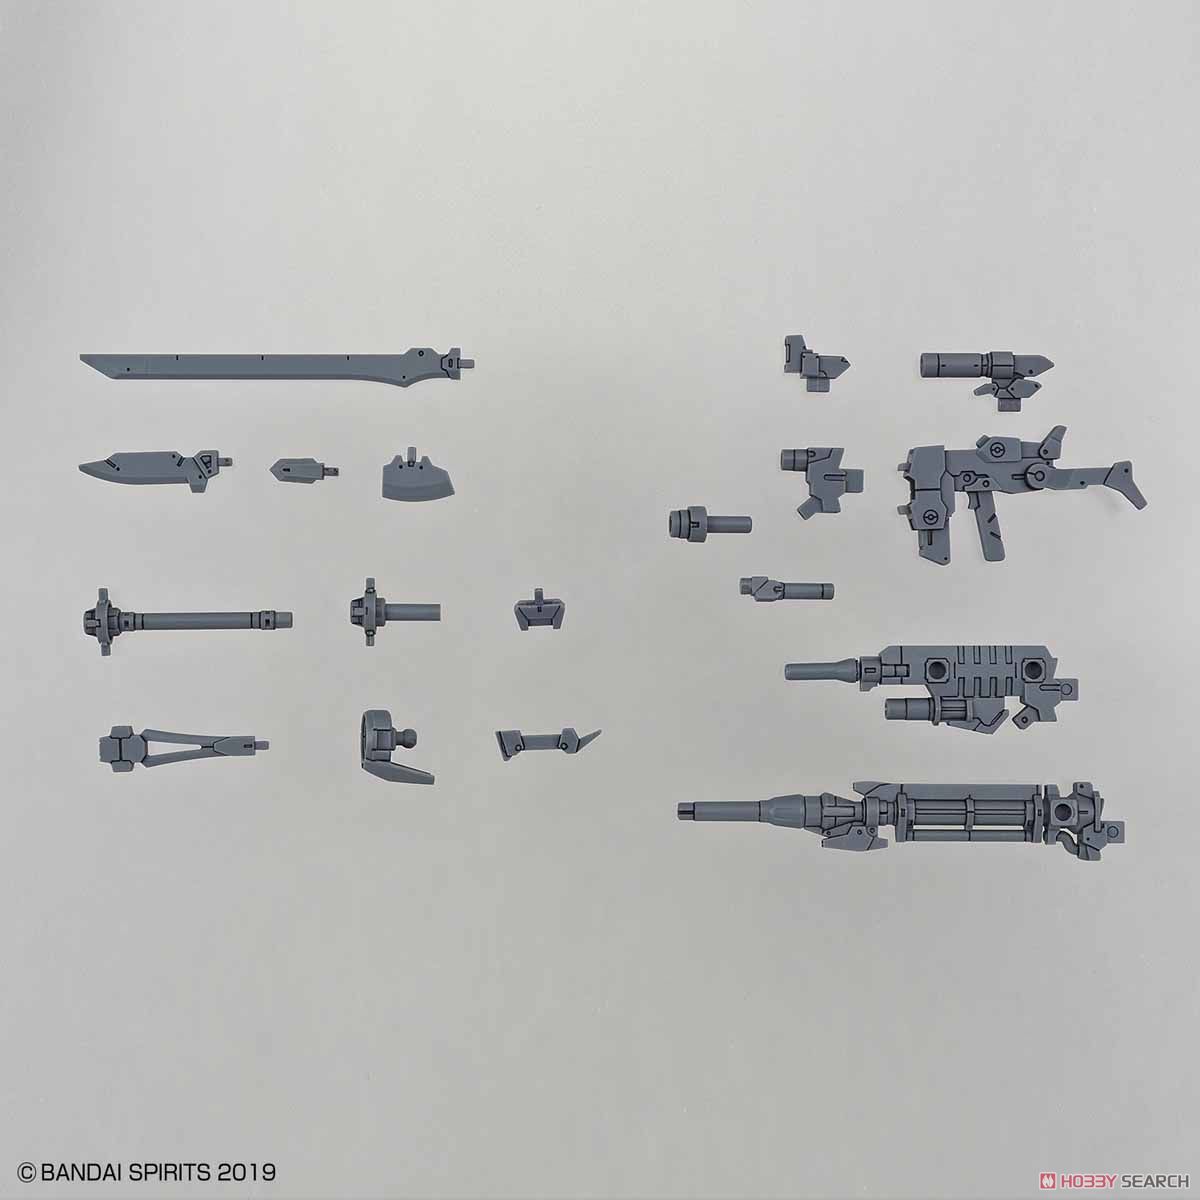 30MM Option Weapon 1 for Alto 1/144